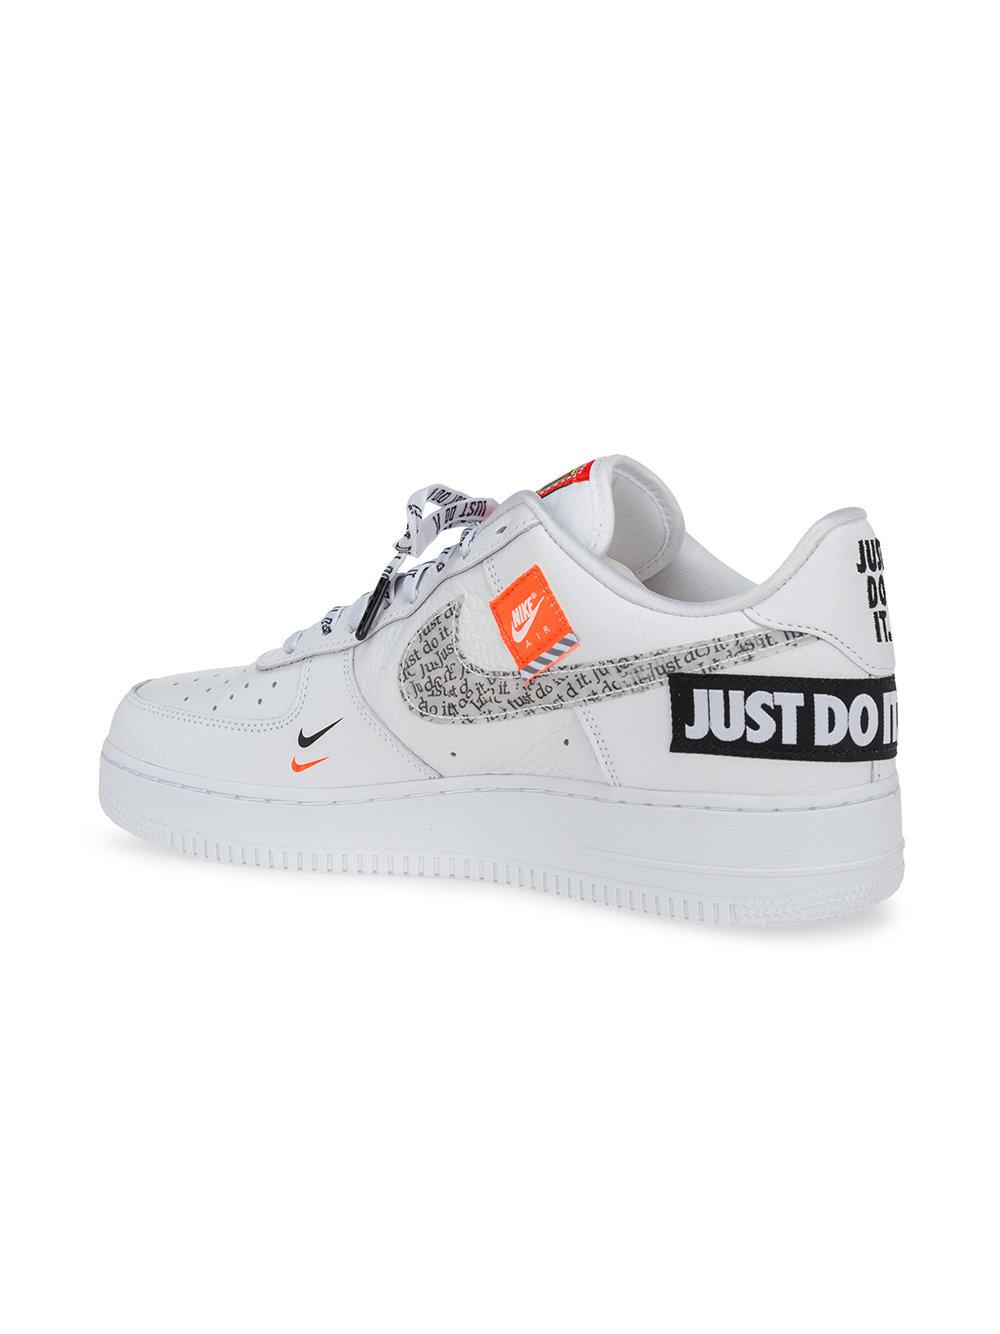 Nike Leather Air Force 1 '07 Premium Jdi Sneakers in White for Men - Lyst